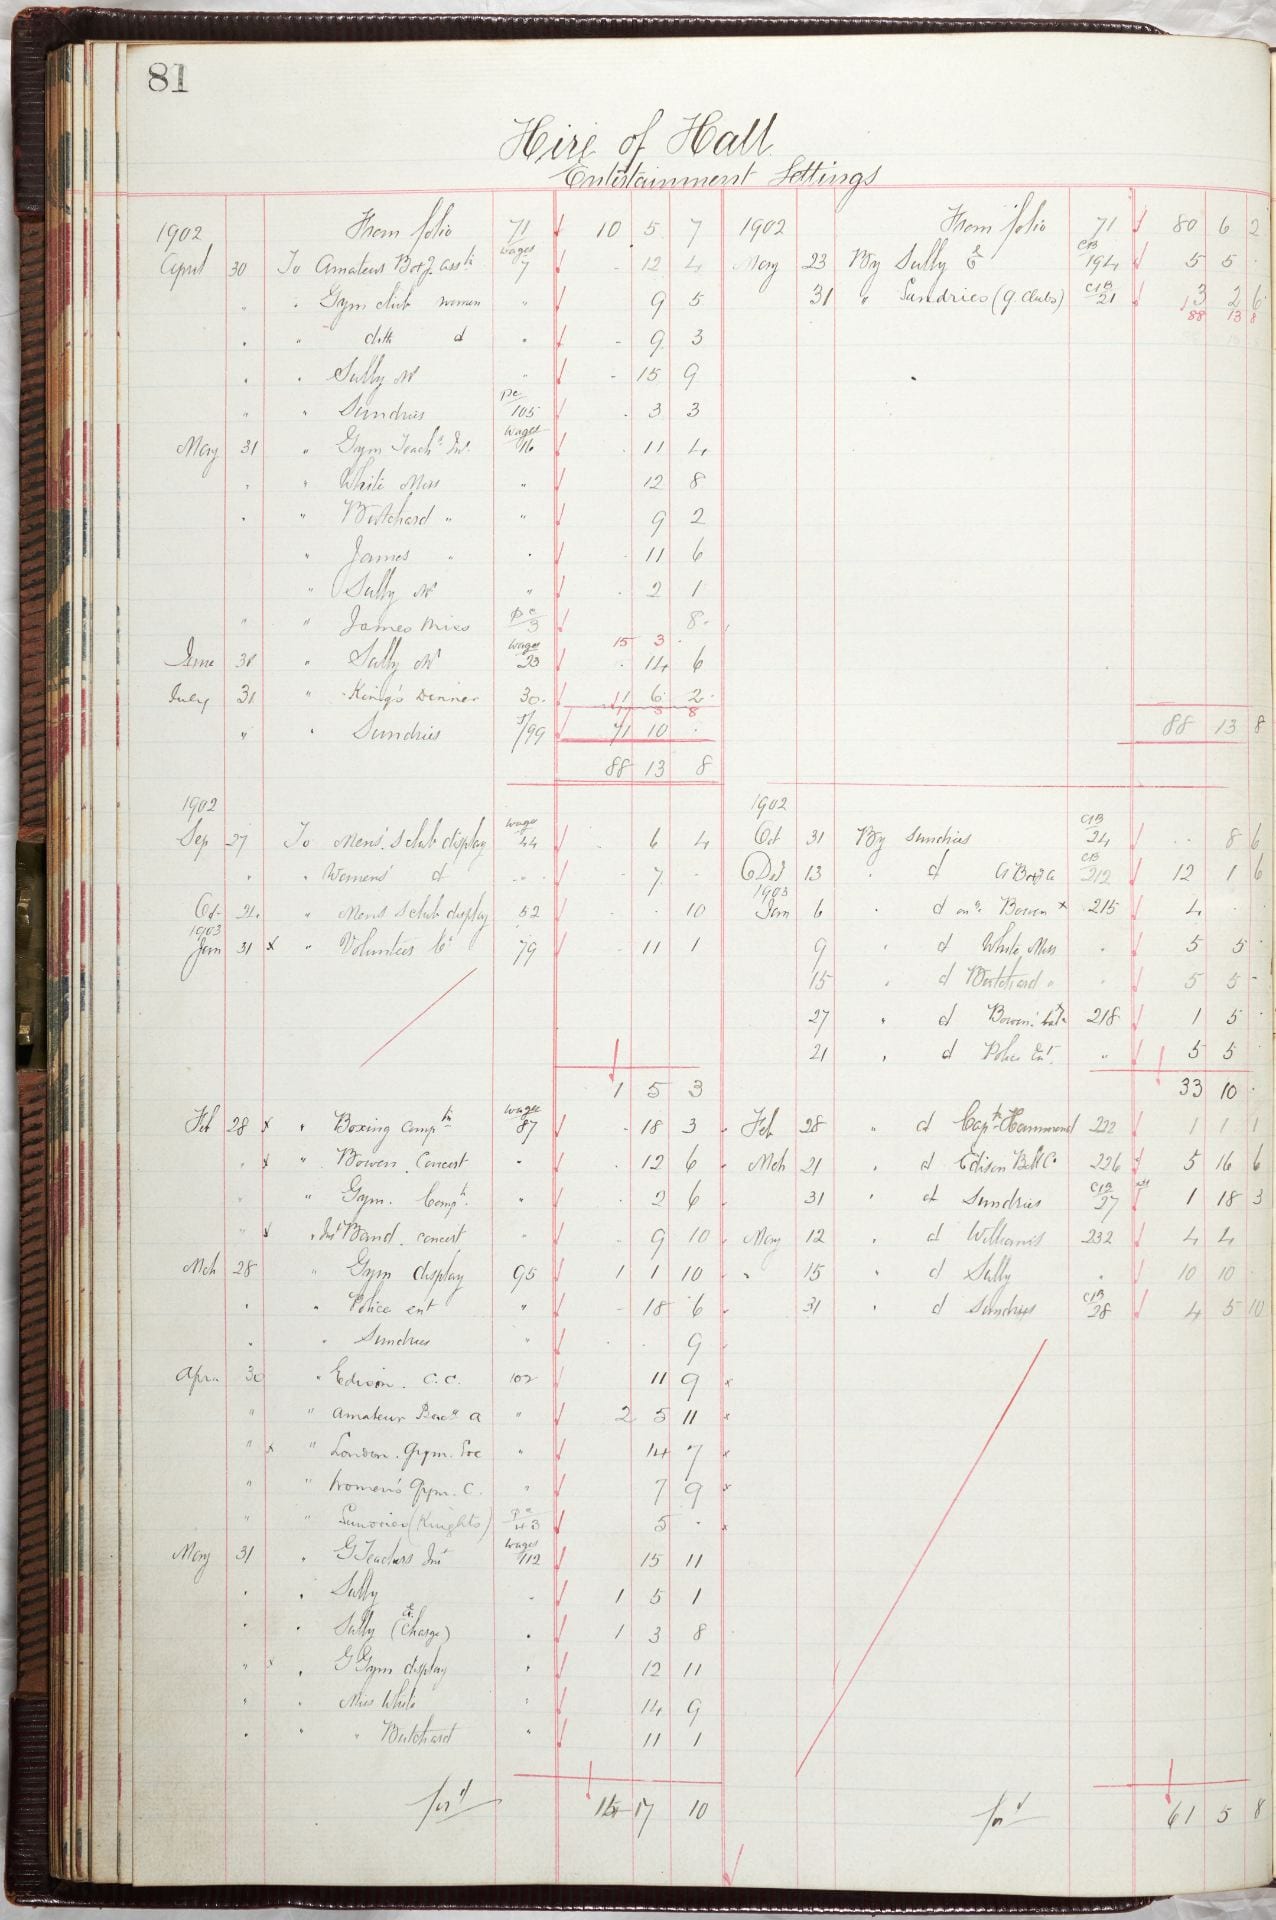 Financial ledger page 81 Hire of Hall - Entertainment Settings. Costs arising from 1902.